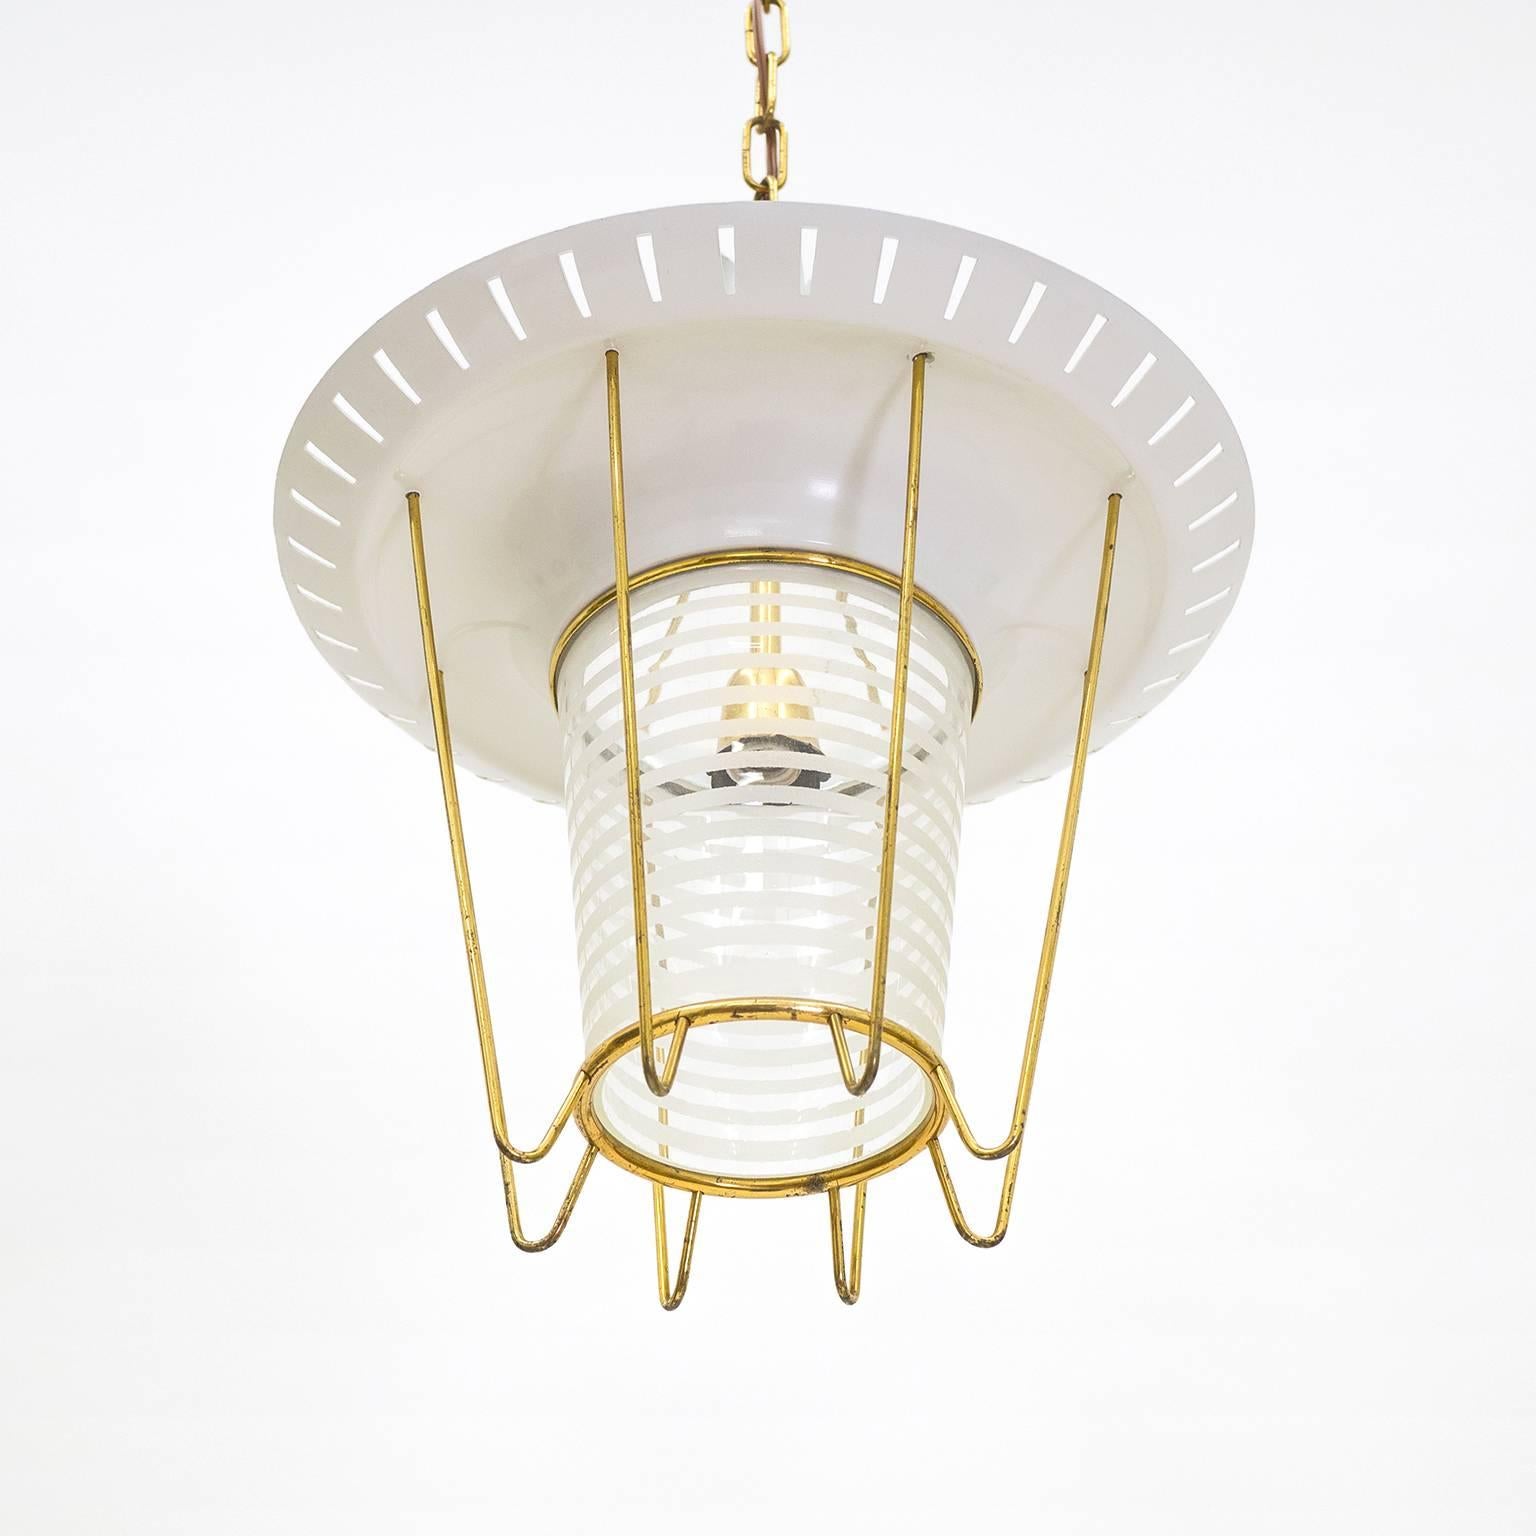 Italian 1950s Lantern in Brass, Glass and Lacquered Aluminum 2